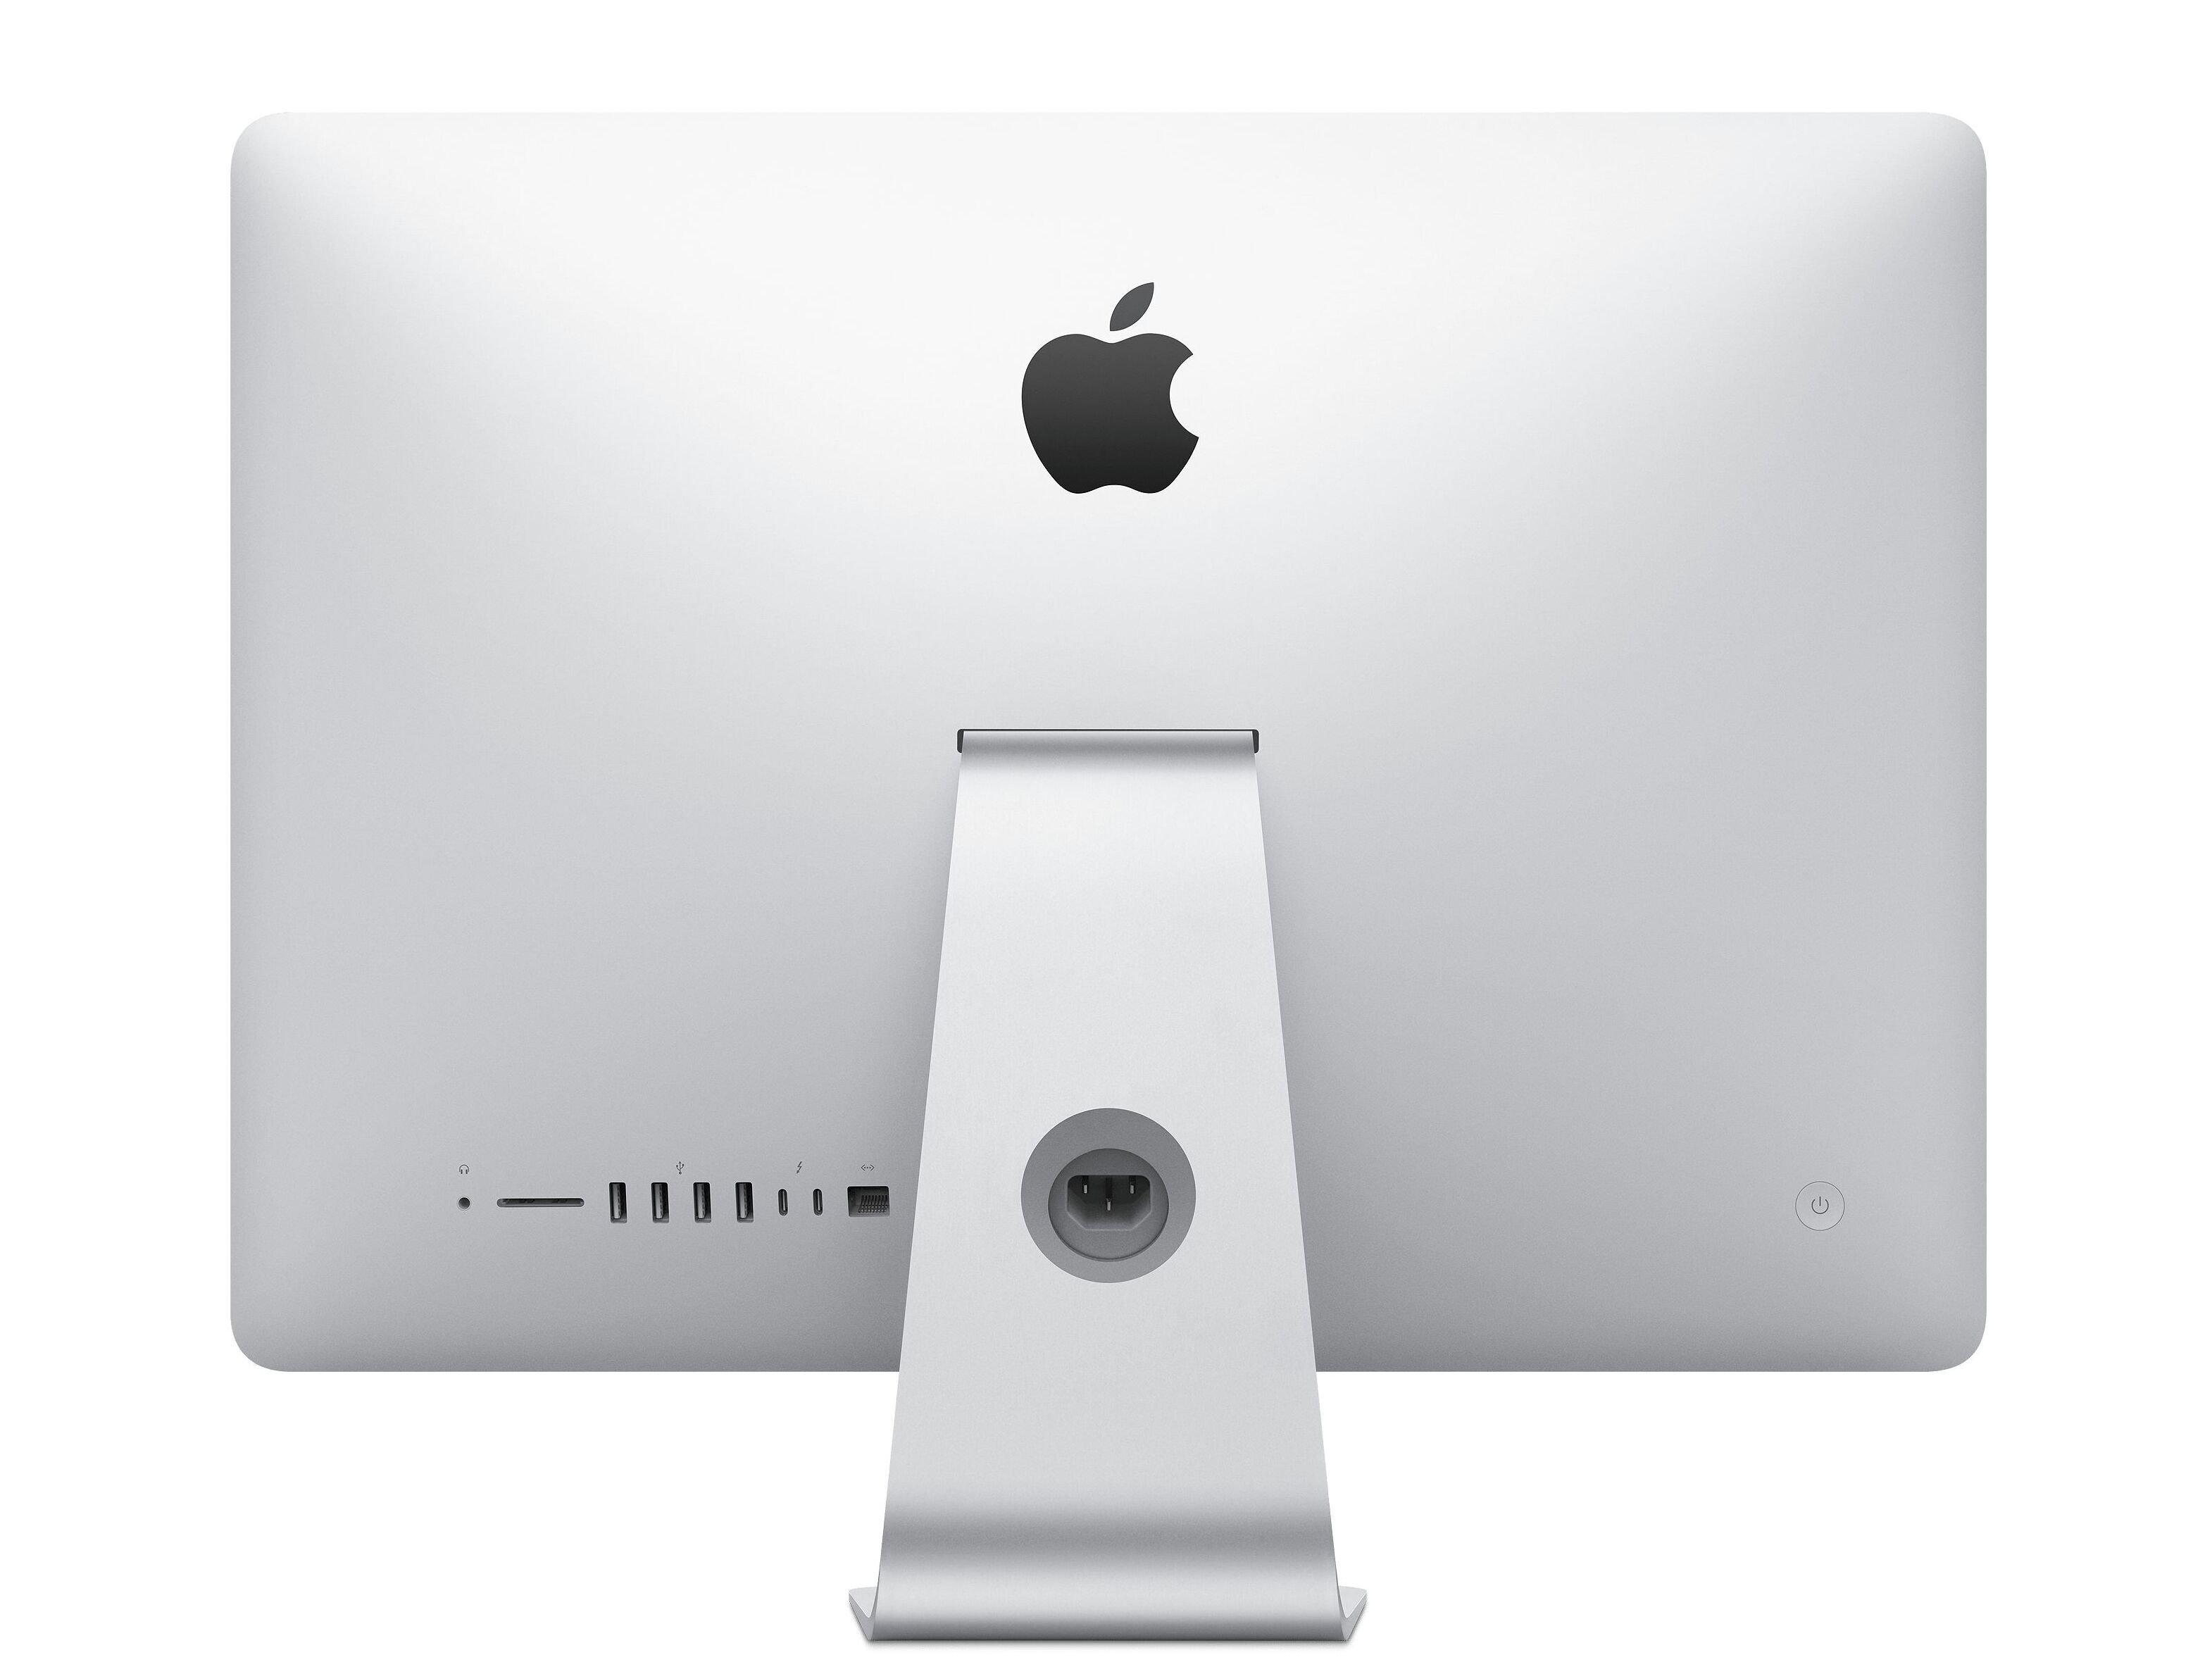 Apple  Refurbished iMac 21,5" 2017 Core i5 2,3 Ghz 16 Gb 500 Gb HDD Silber - Sehr guter Zustand 